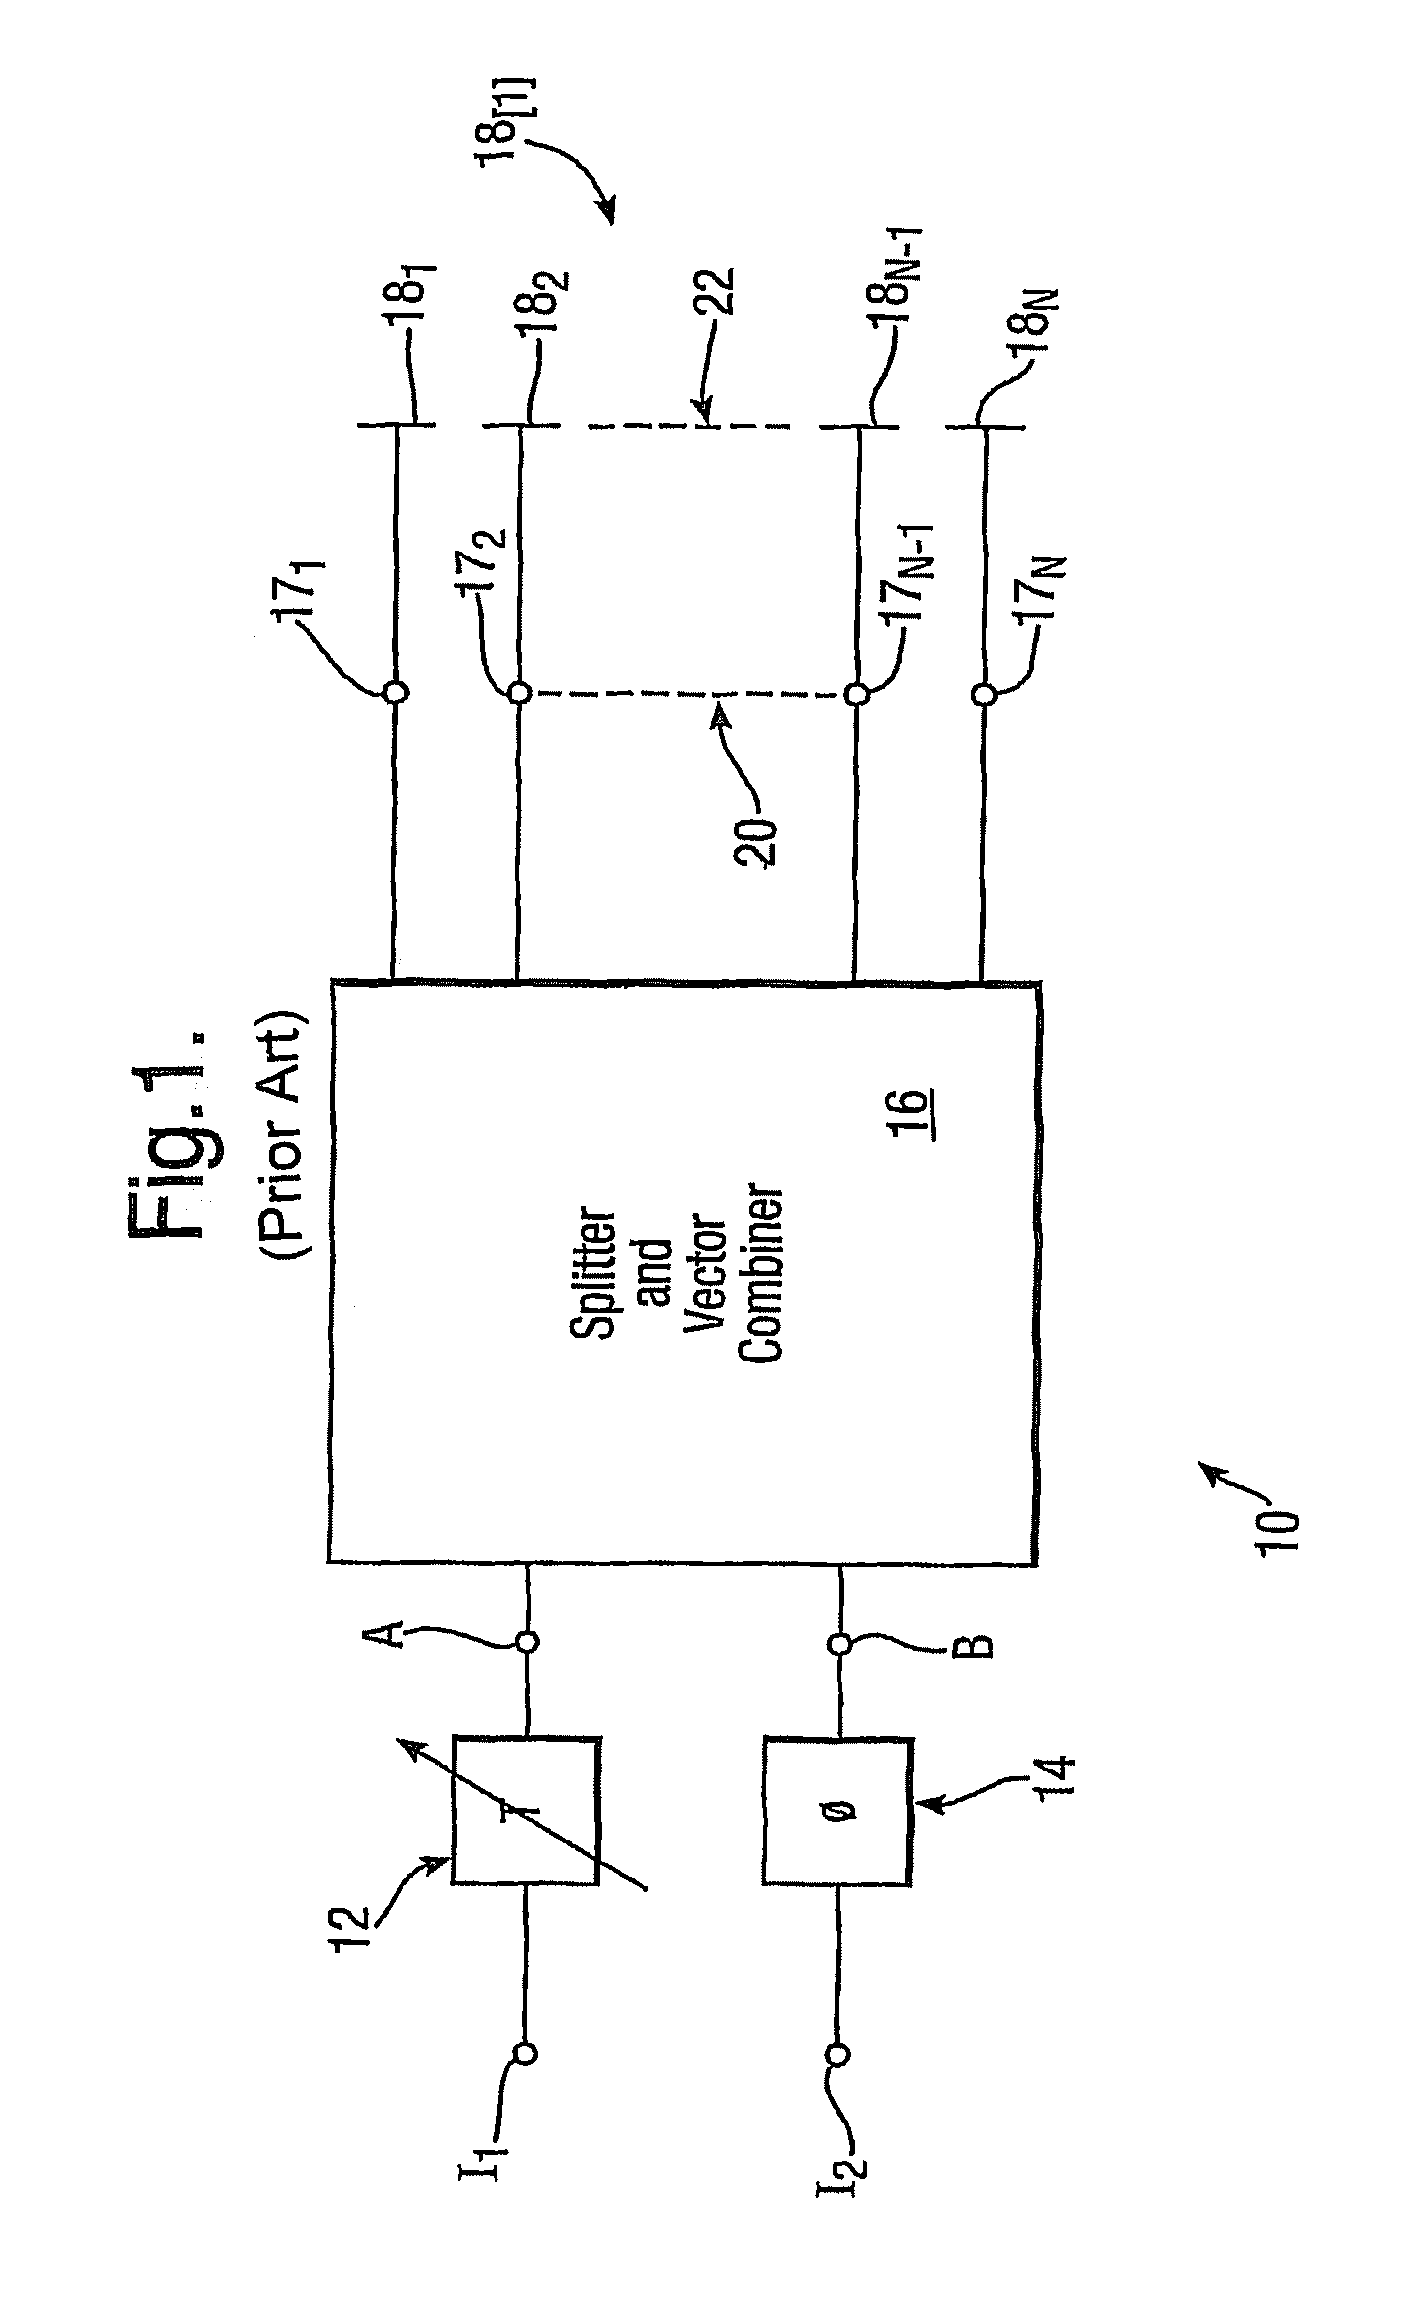 Phased array antenna system with two dimensional scanning